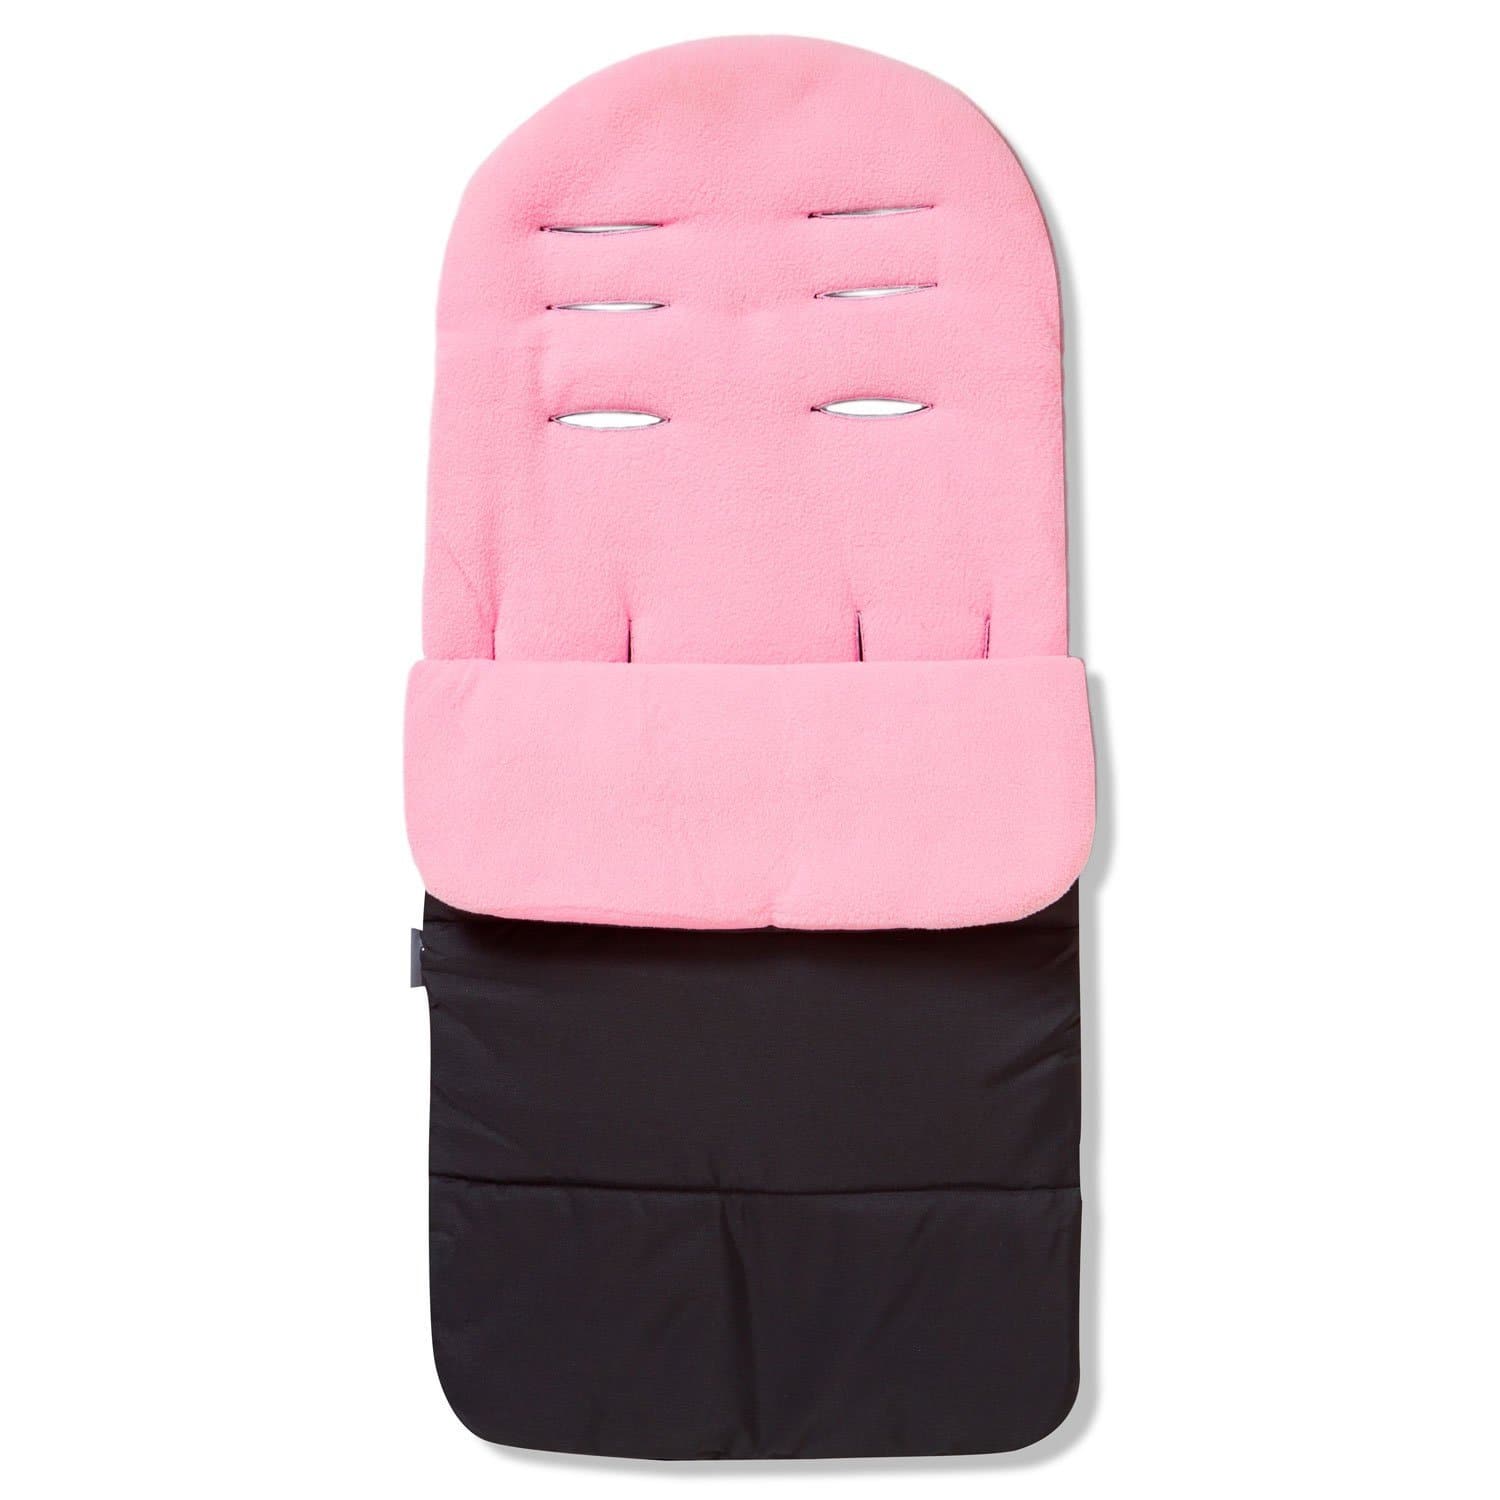 Premium Footmuff / Cosy Toes Compatible with Esprit - Candy Pink / Fits All Models | For Your Little One